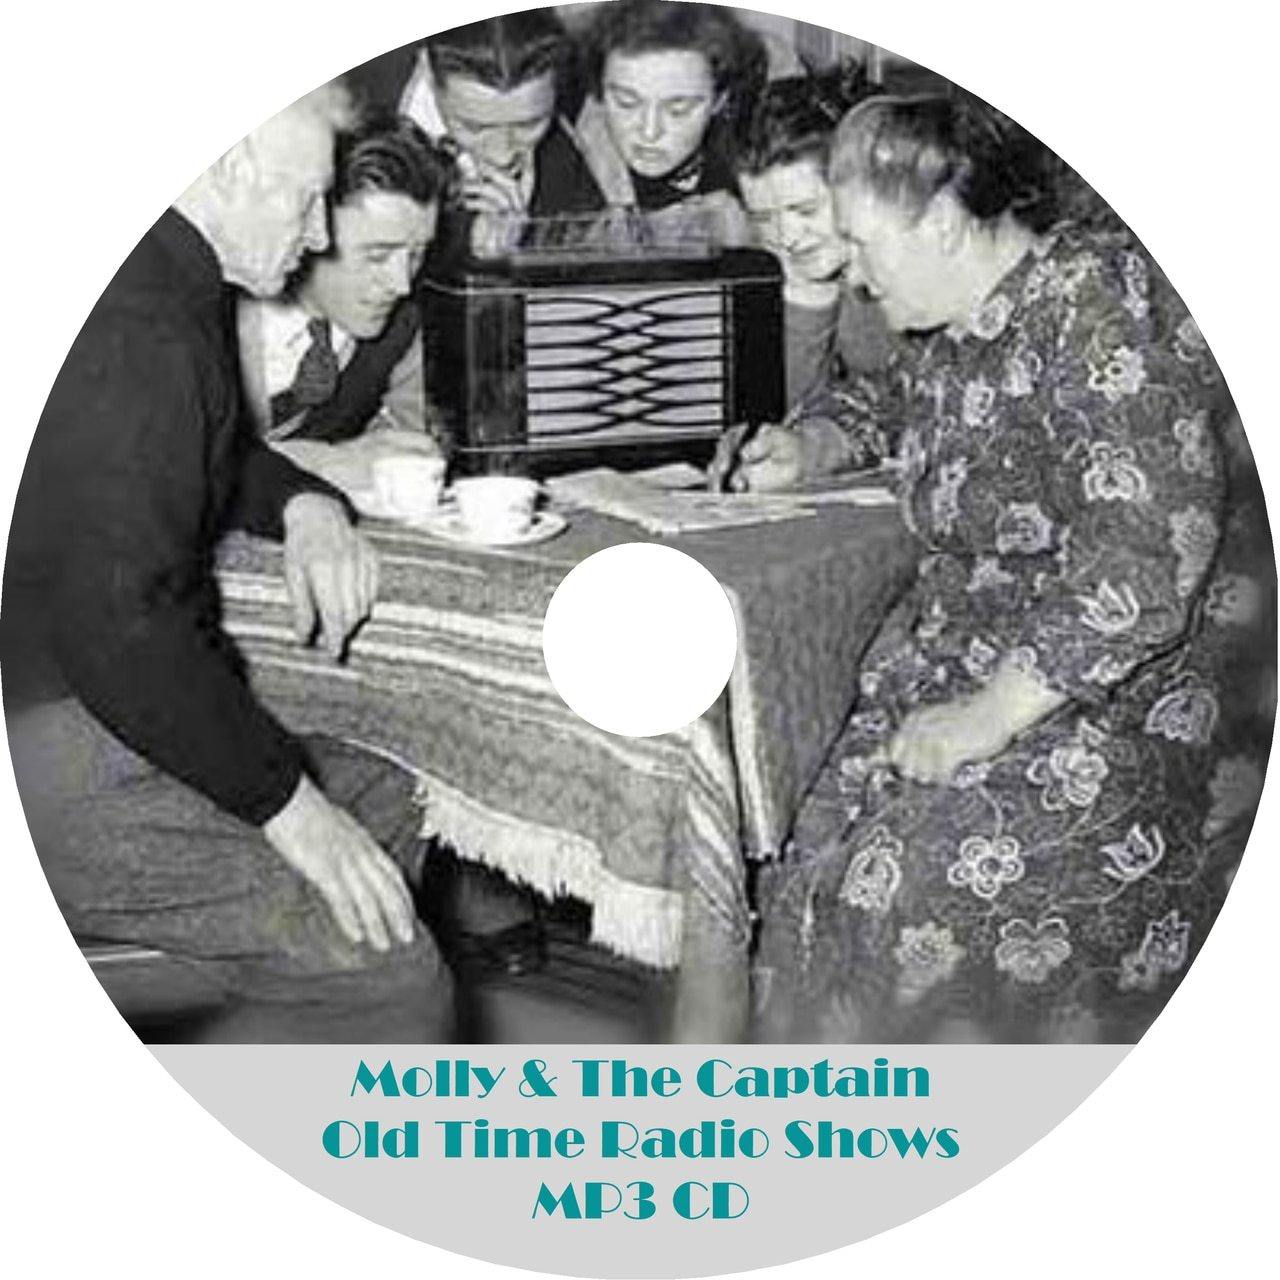 Molly & The Captain Old Time Radio Shows 2 Episodes On MP3 CD - OTR World